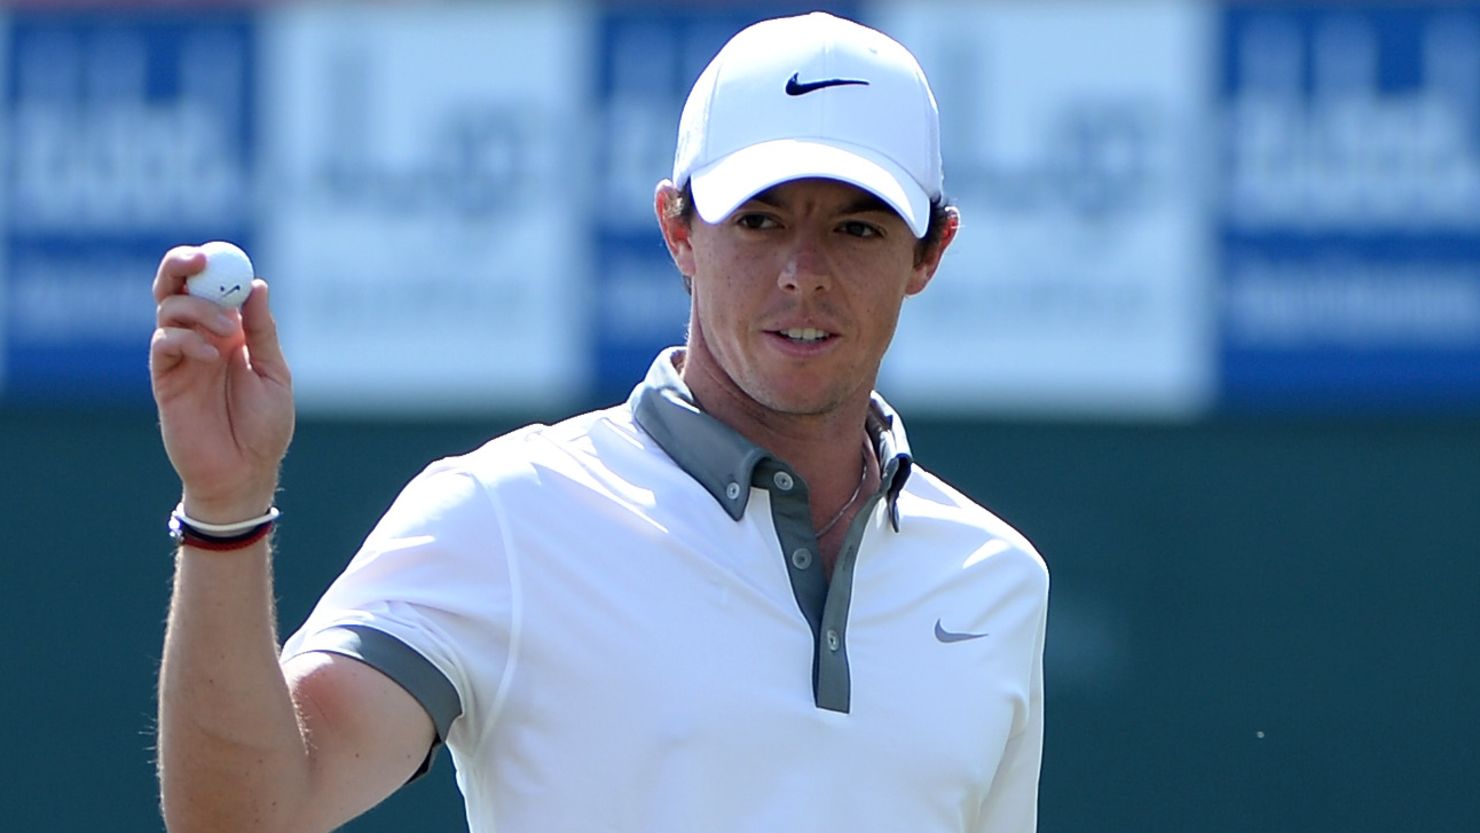 Rory McIlroy acknowledges the galleries after picking up another birdie during his nine-under-par 63 in Dubai.